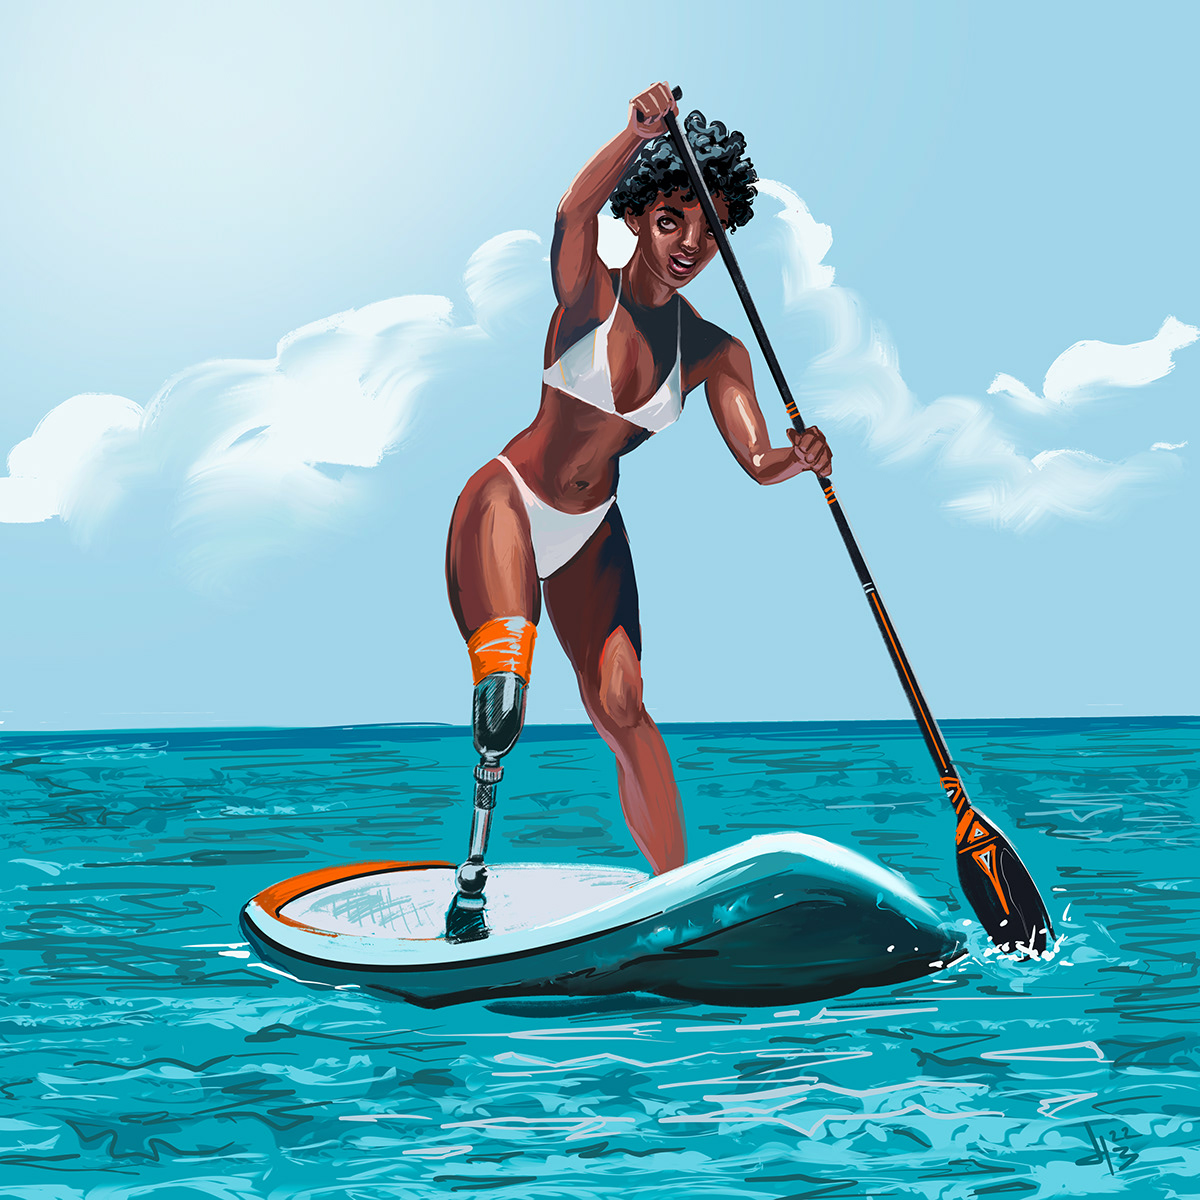 Active Adobe Portfolio amputee disability disabled Diversity Holiday ILLUSTRATION  inclusion limb differences Ocean paddle surfing prosthetic leg Prosthetic Limb Travel